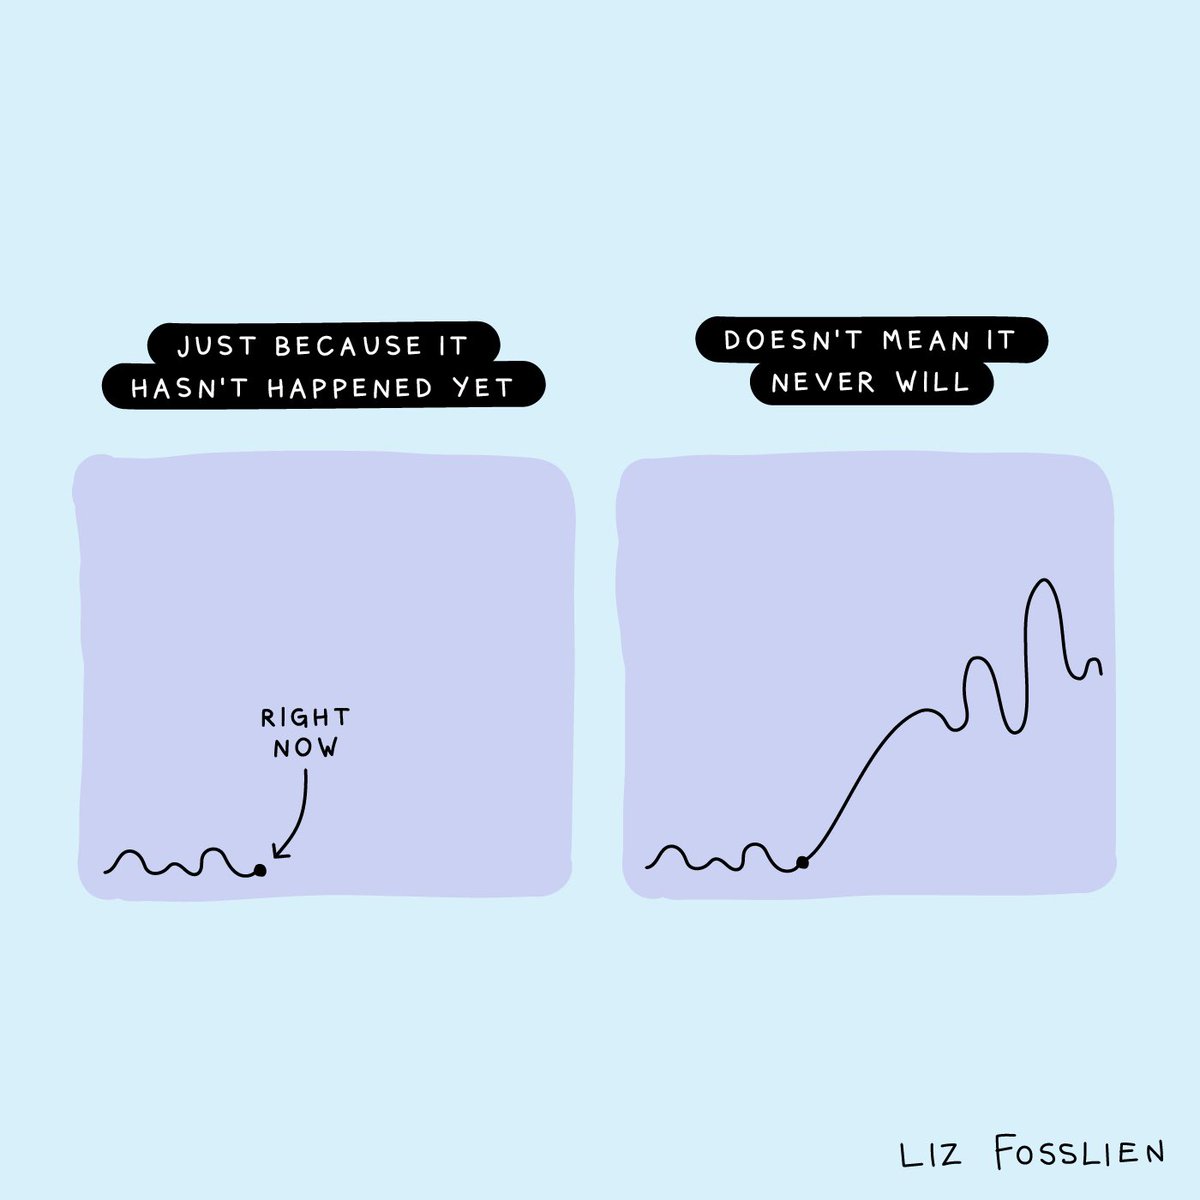 #AcademicTwitter So true! Progress takes time. #phdvoice #AcademicChatter